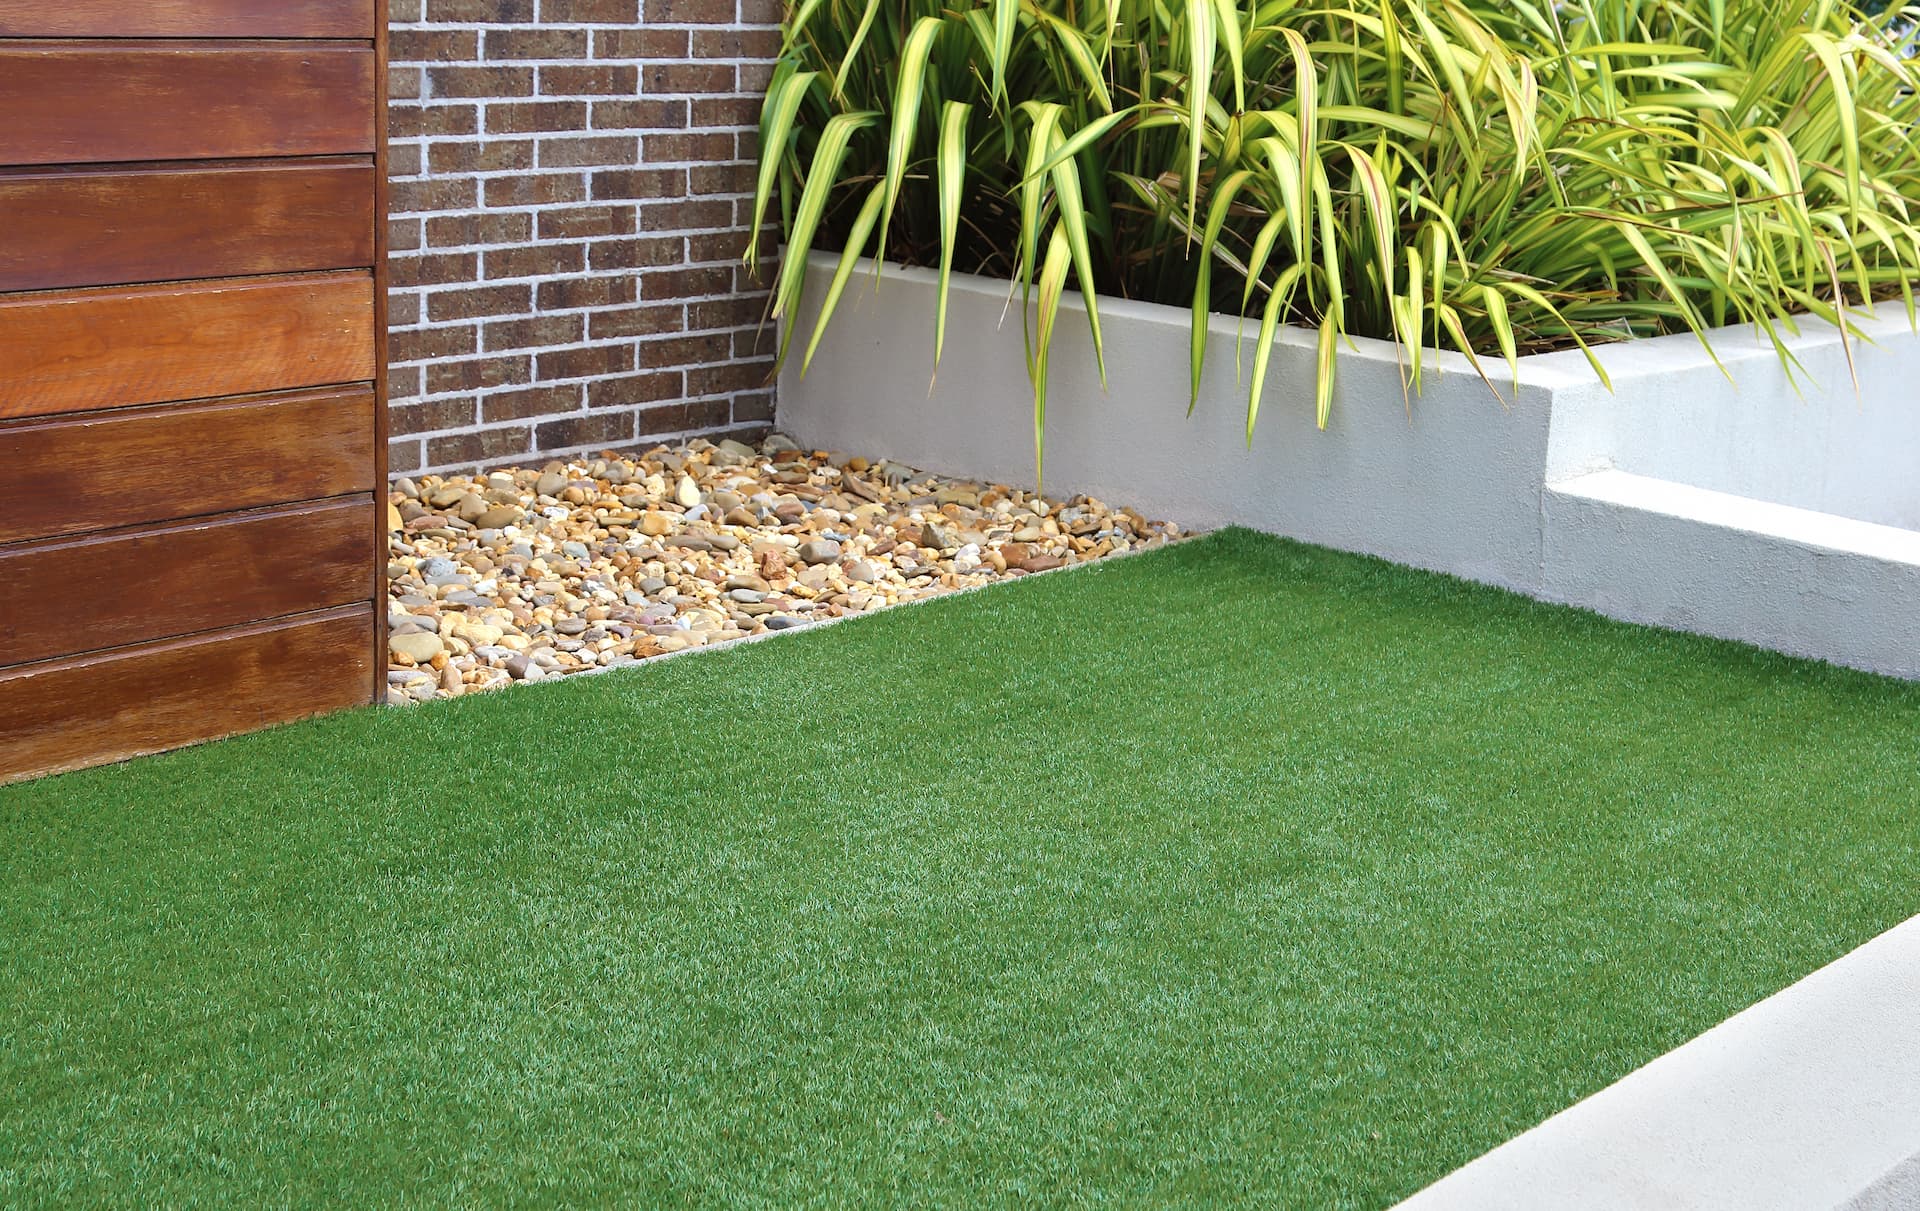 Licenced Artificial Grass & Turf services in Timperley